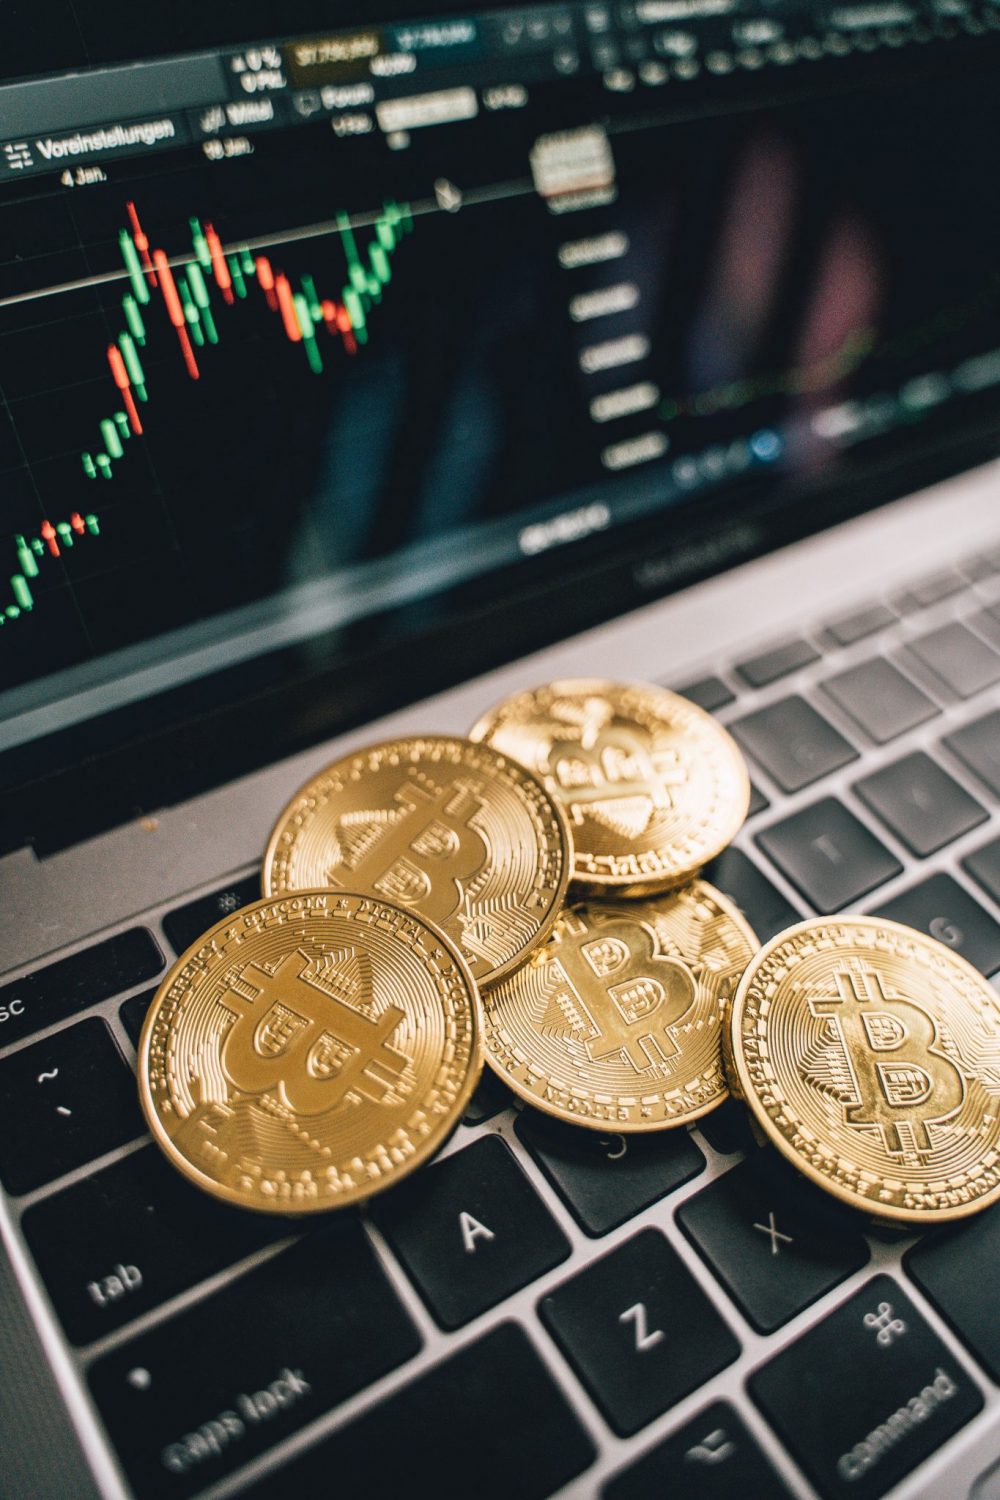 The Ultimate Guide to Cryptocurrency: What You Need To Know Before Investing